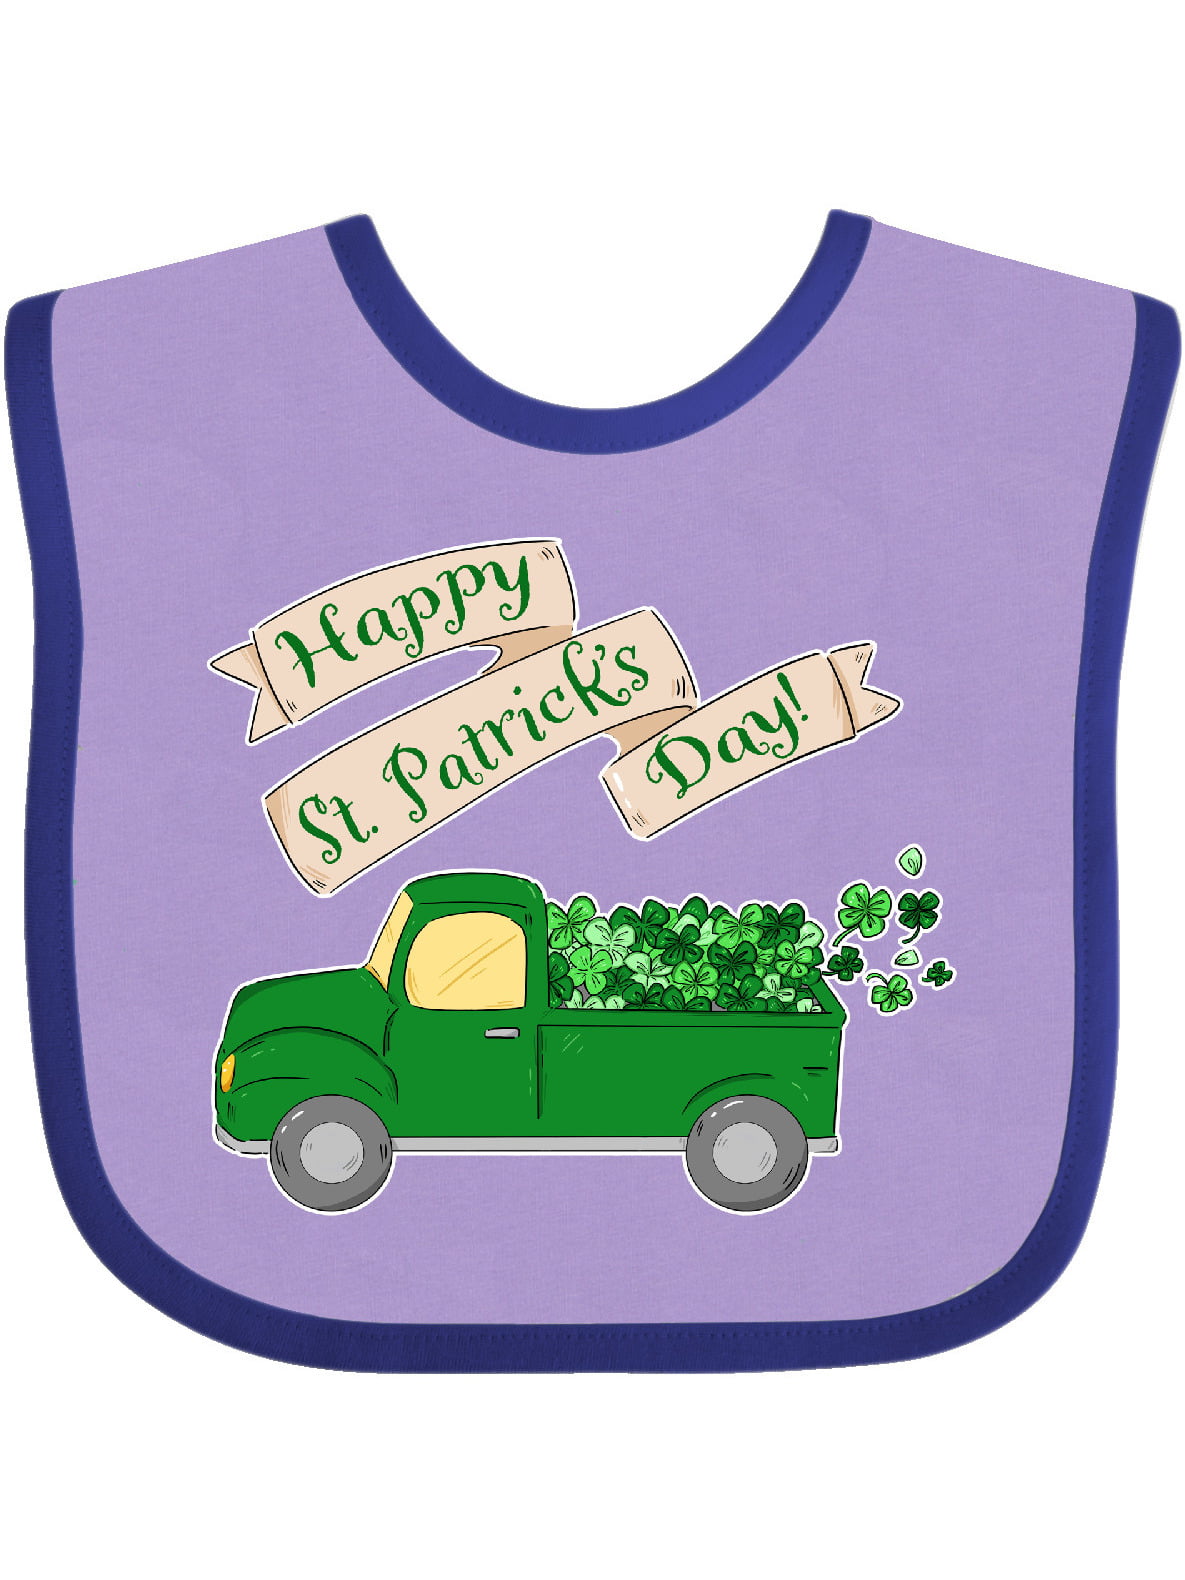 Download Happy St. Patrick's Day Green Truck with Clovers Baby Bib ...